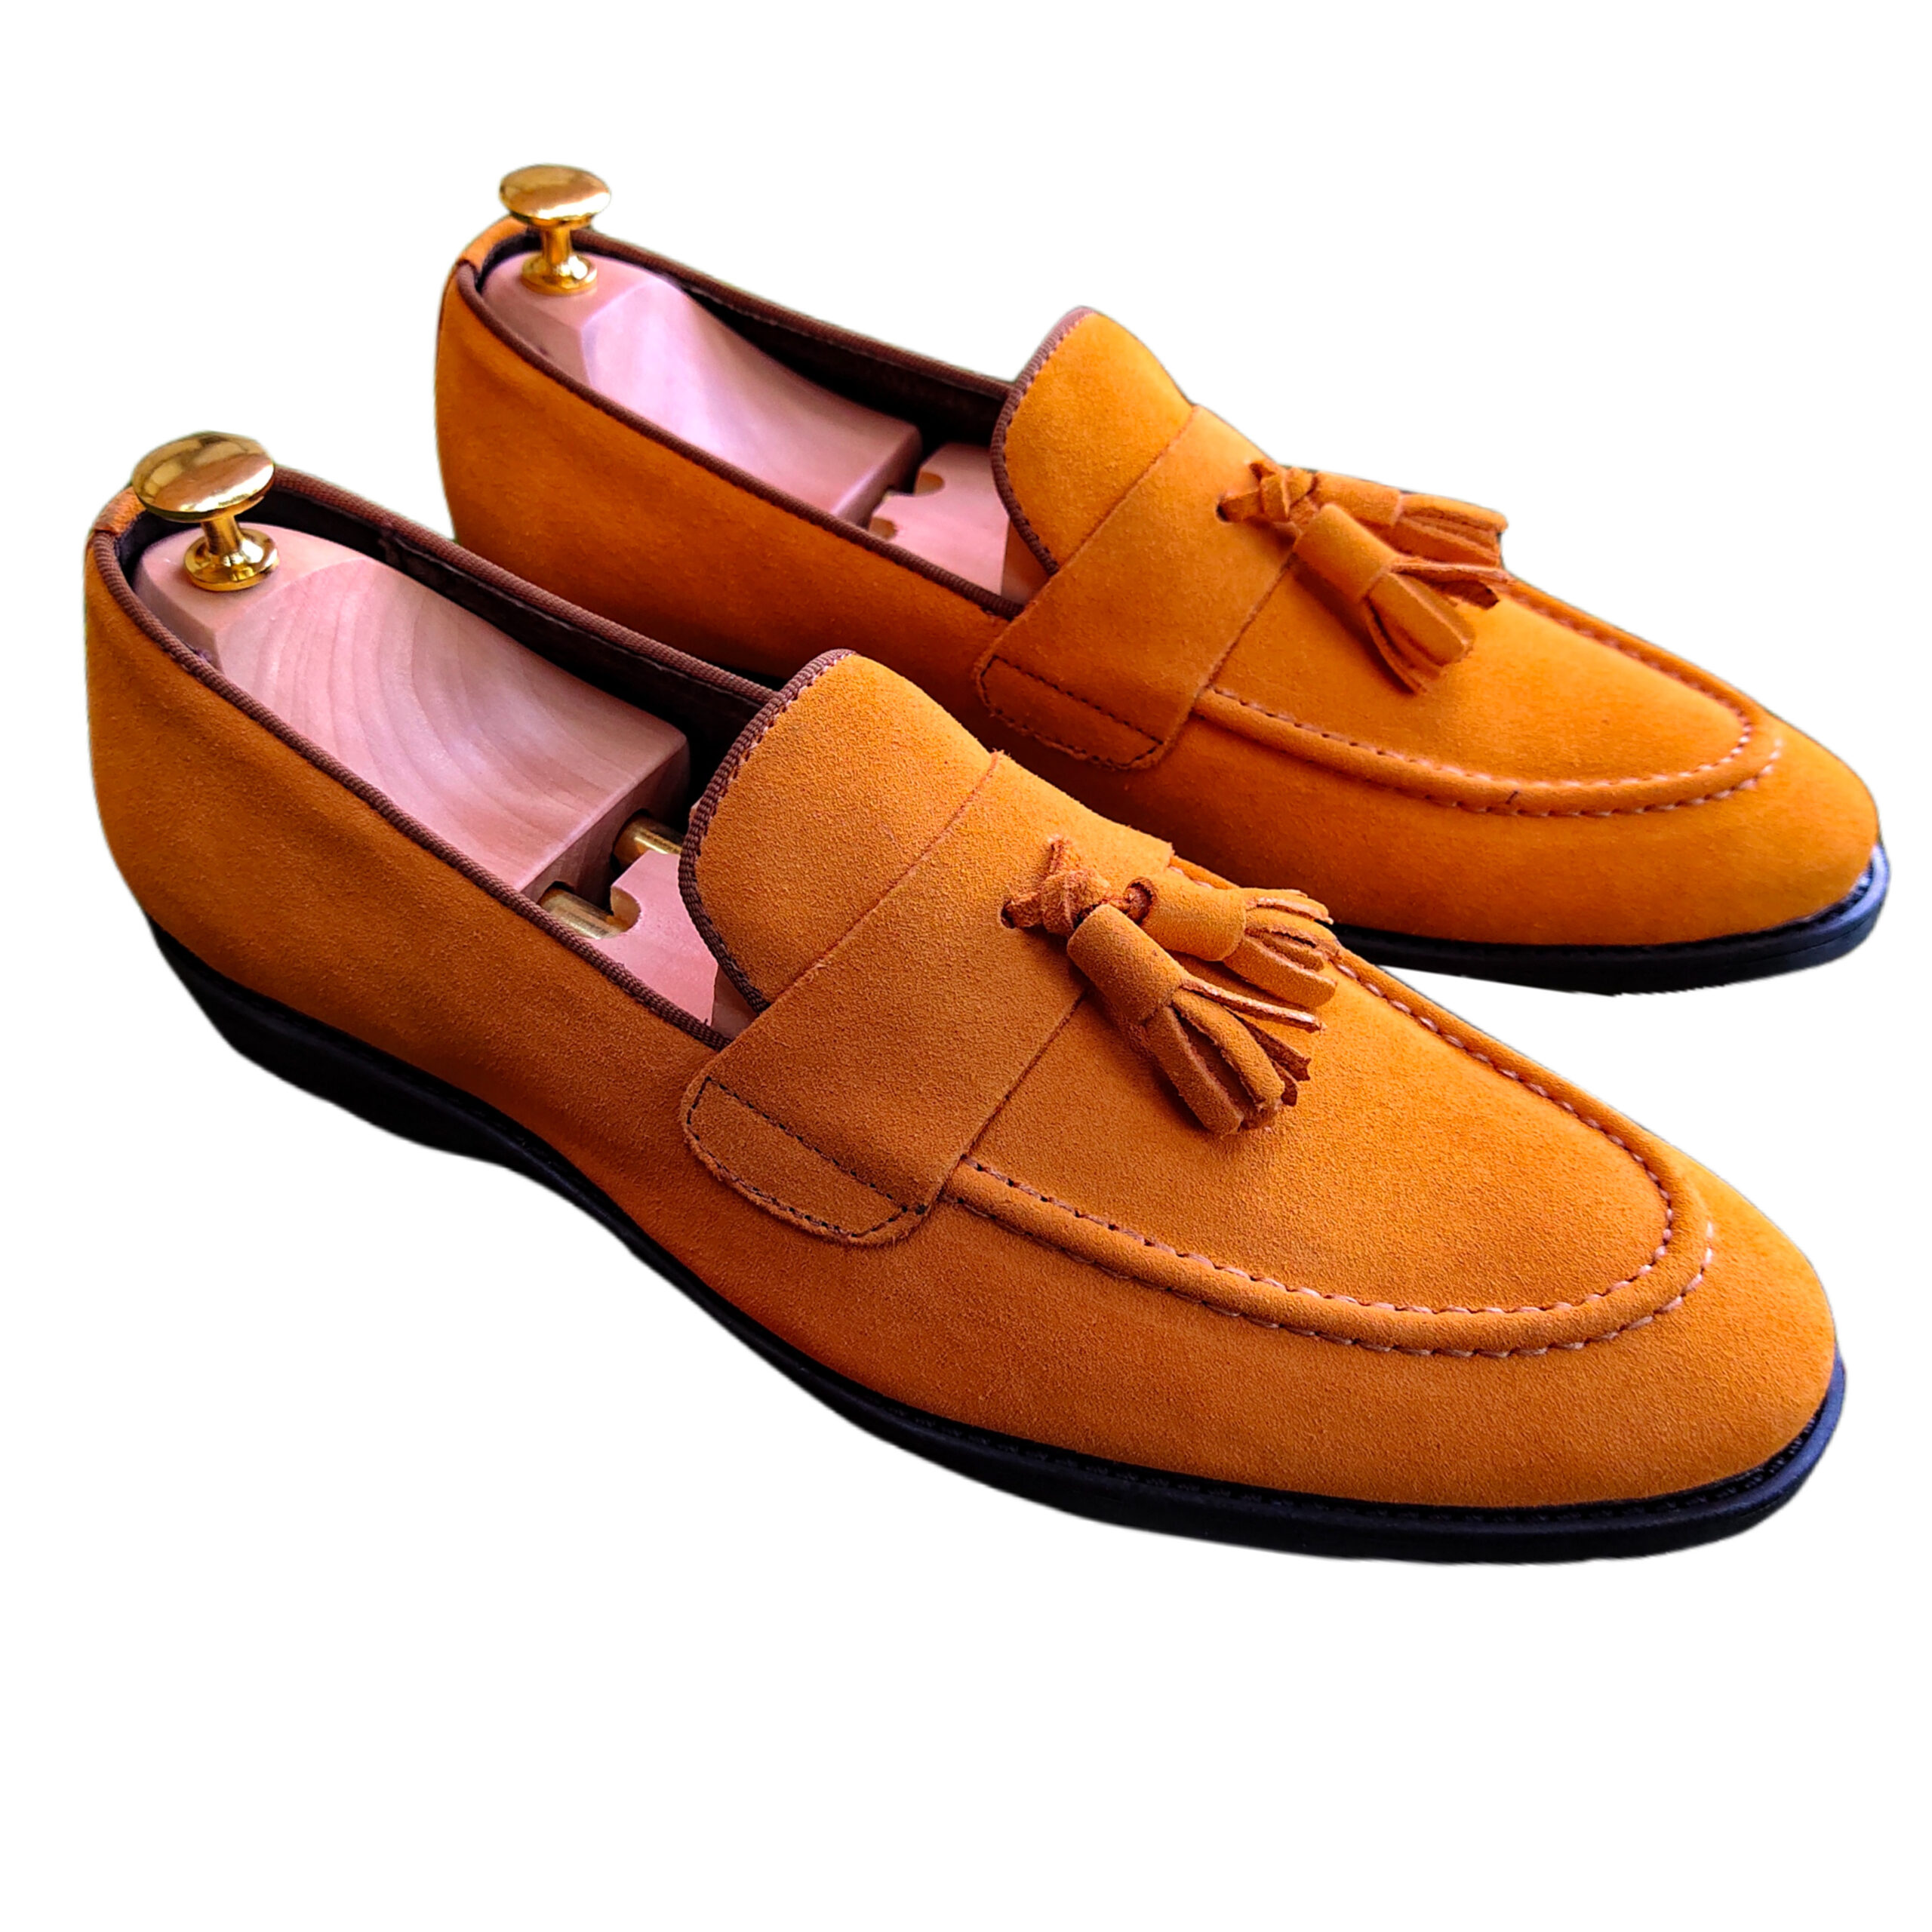 Men's Loafer Shoes - Slip On Shoes. Shoes with no laces - Suede Shoes